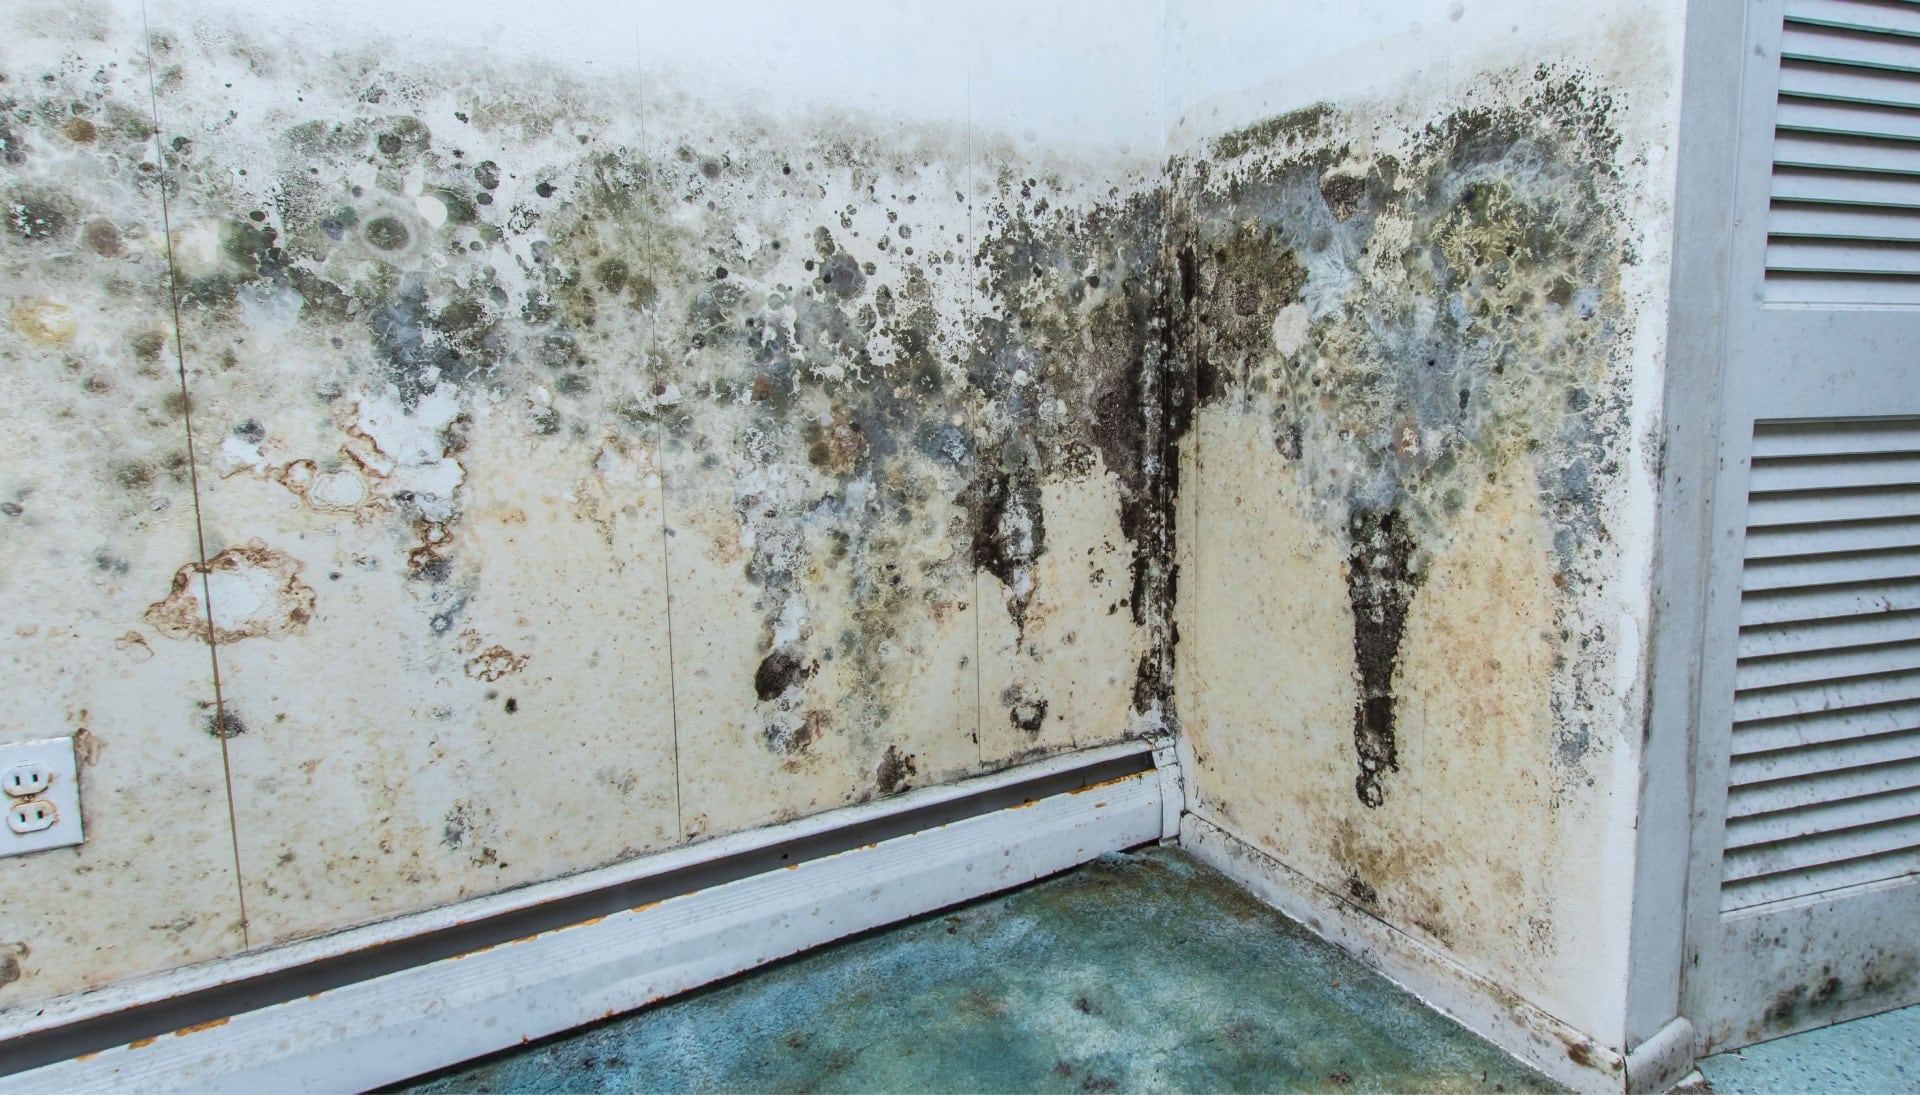 Professional mold removal, odor control, and water damage restoration service in Pittsburgh, Pennsylvania.